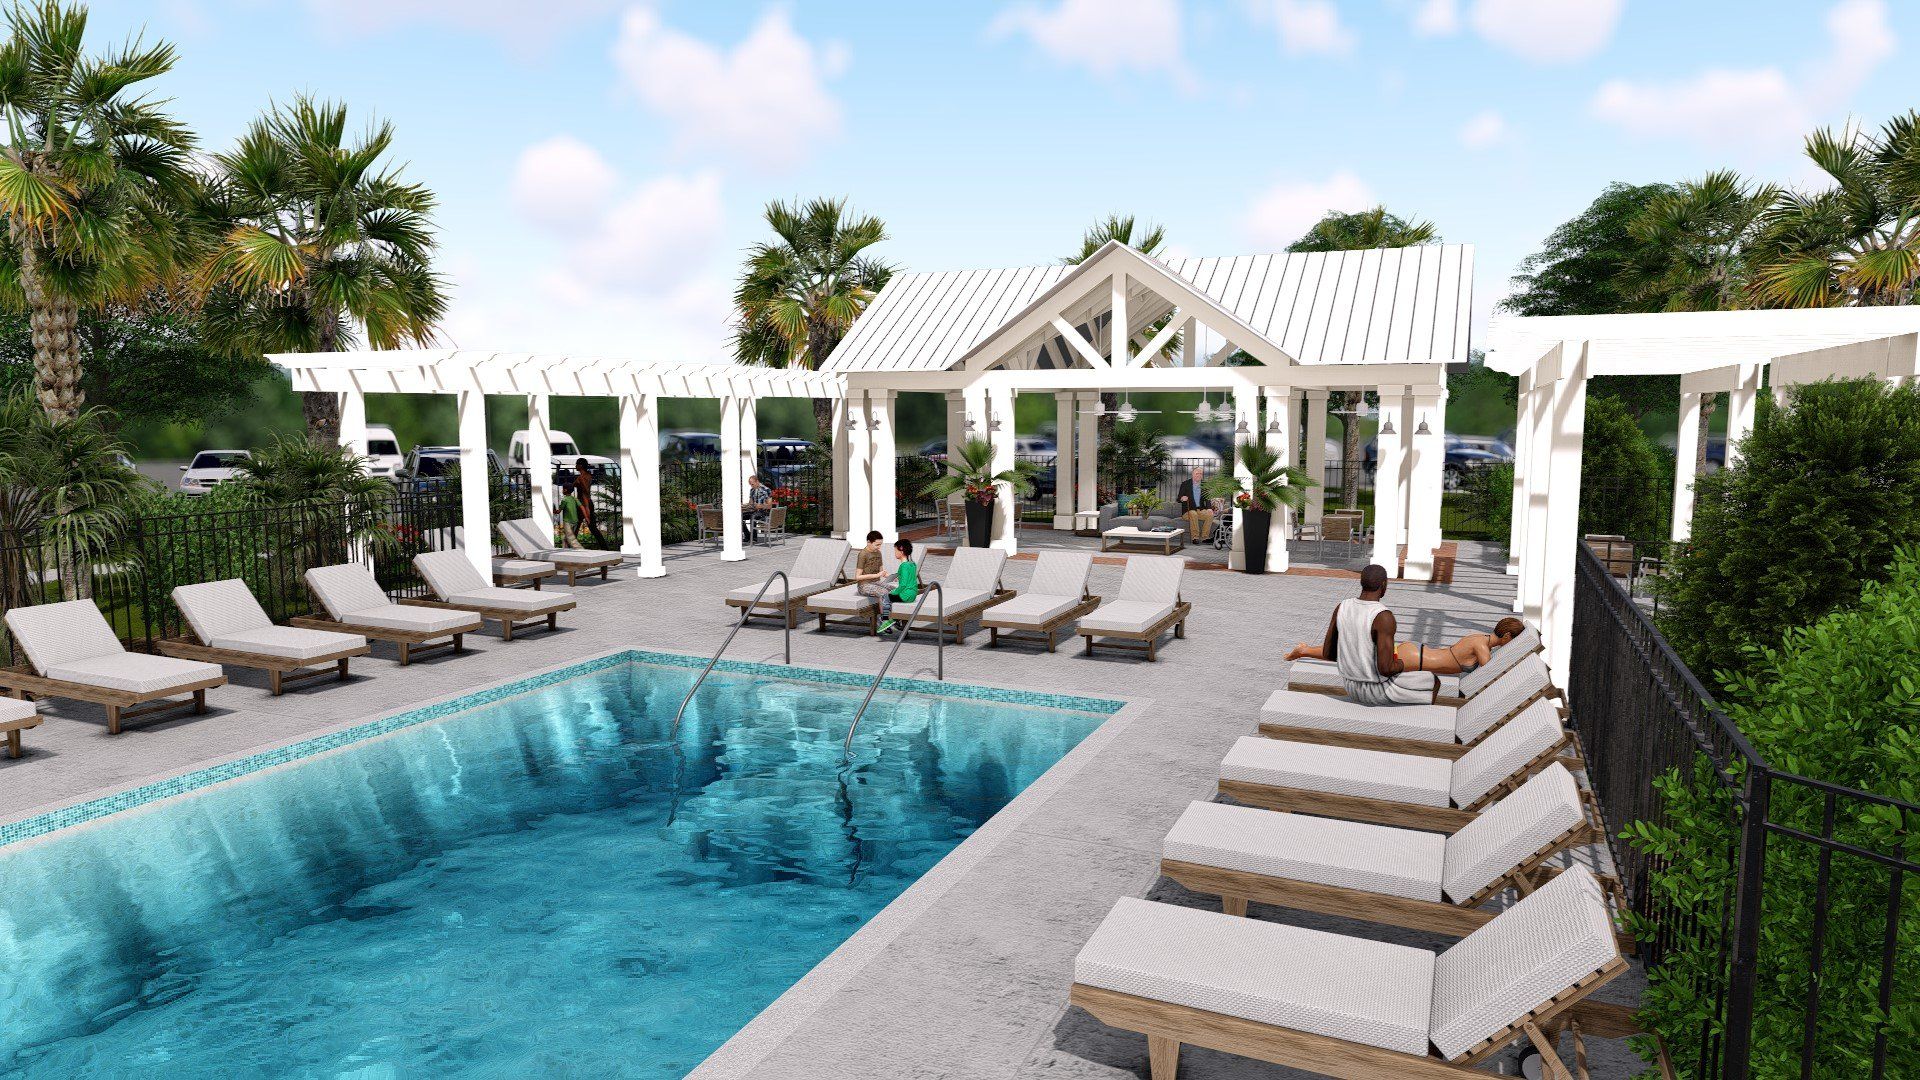 an artist 's impression of a large swimming pool surrounded by lounge chairs .